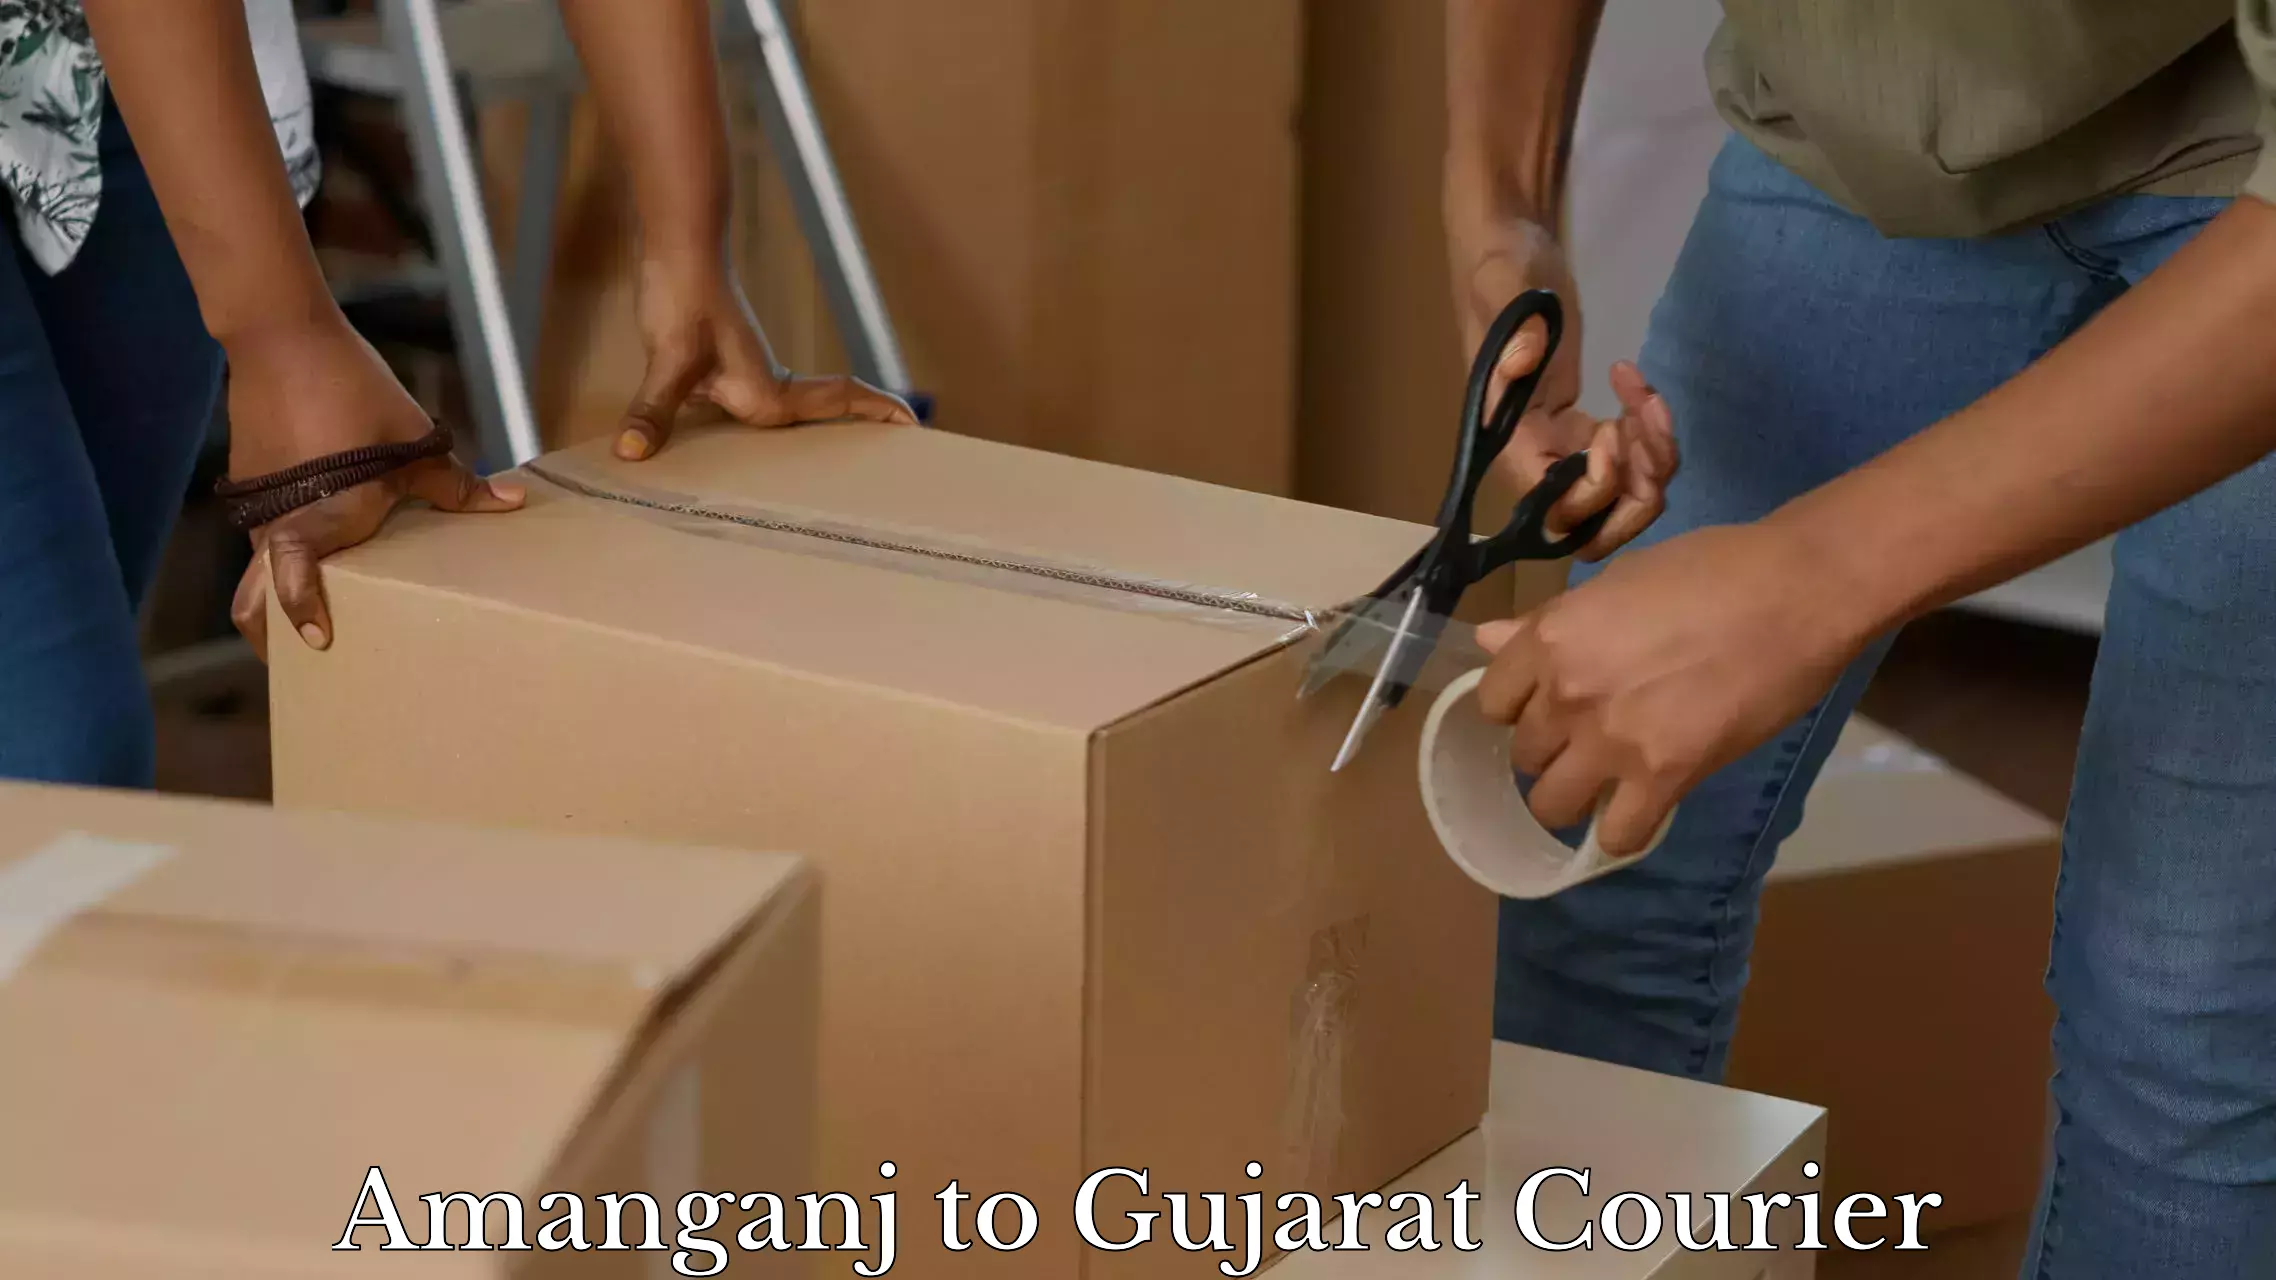 Personal effects shipping in Amanganj to Mundra